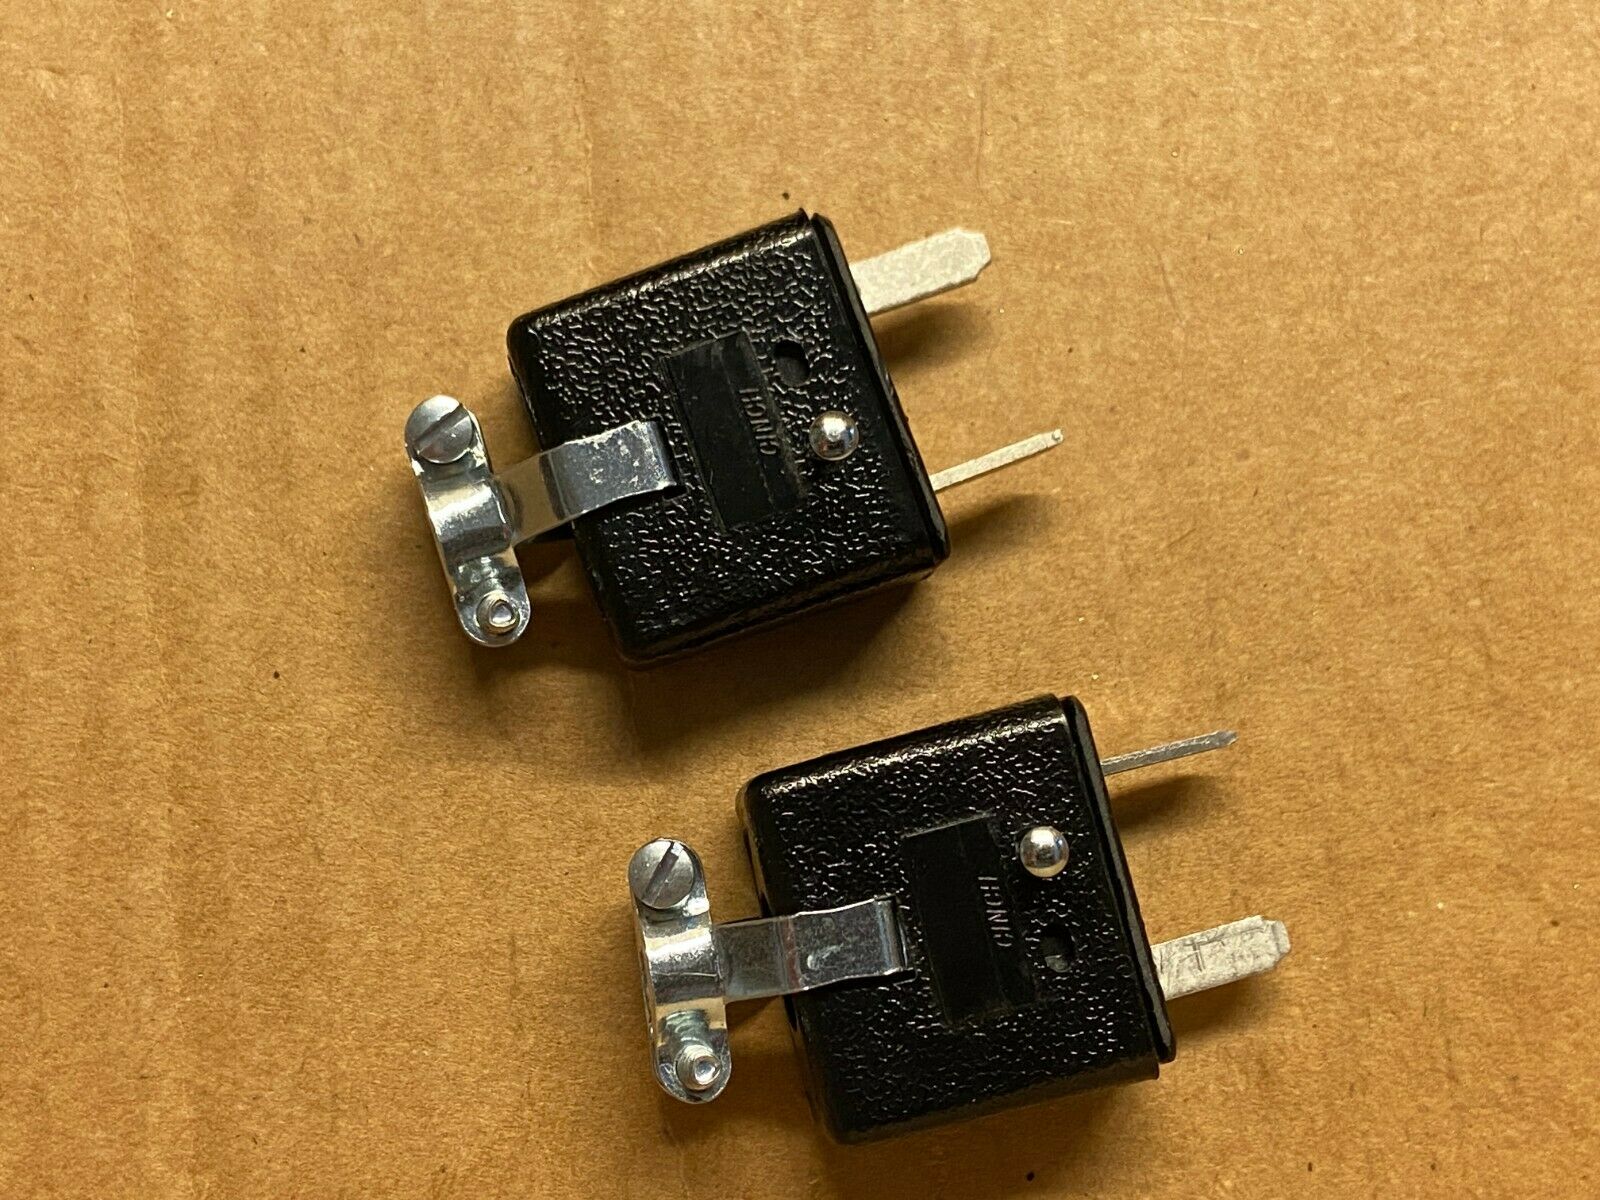 2 New Pioneer Speaker Plug Replacements For Vintage Receivers (qty)